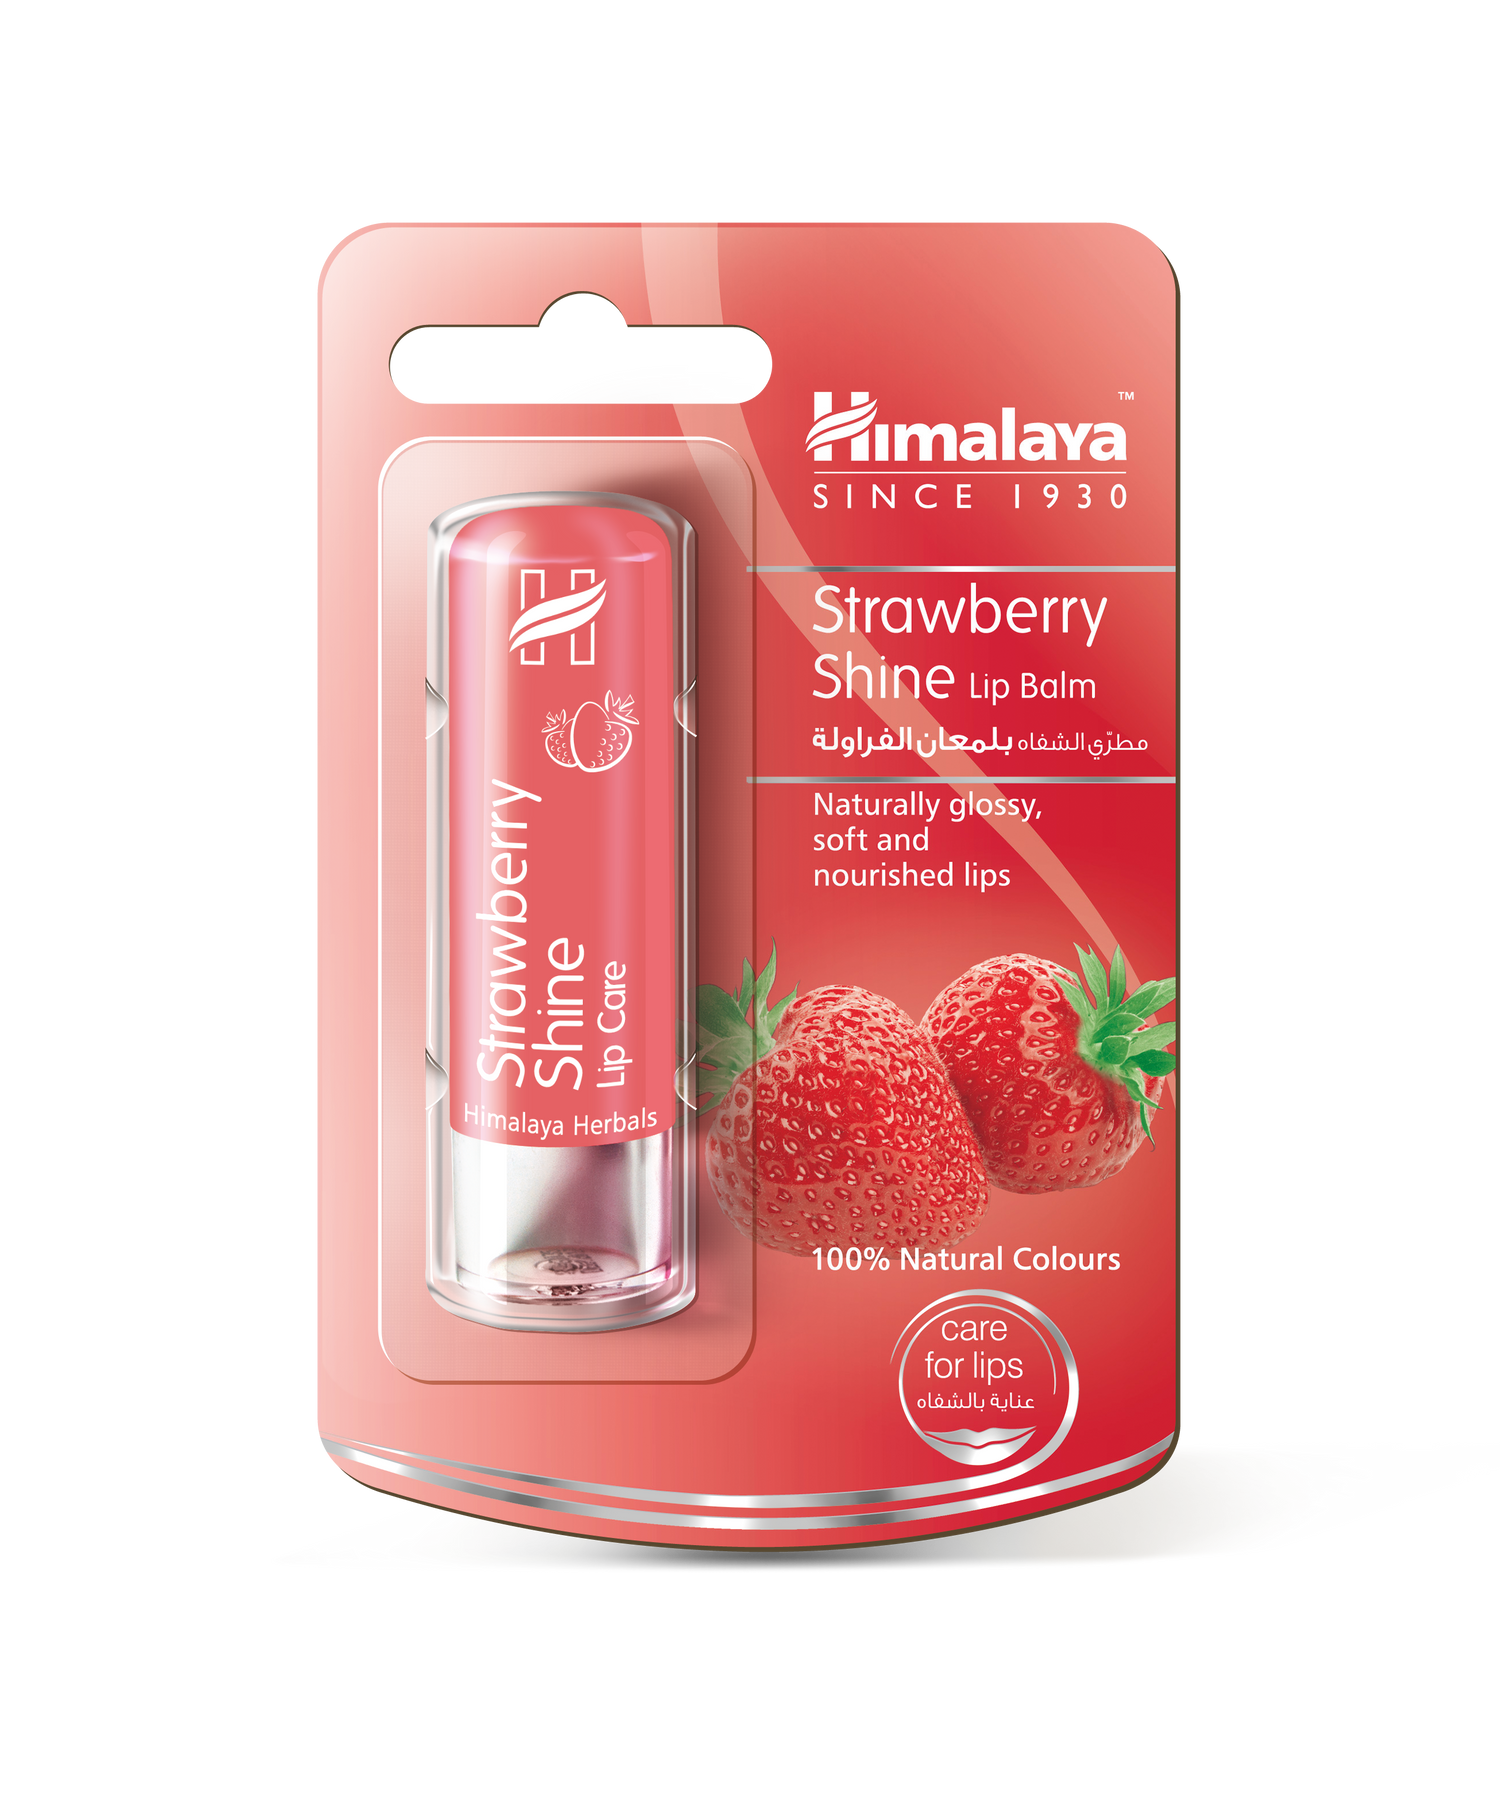 Dot & Key Strawberry Lip Balm for soft and naturally pink lips